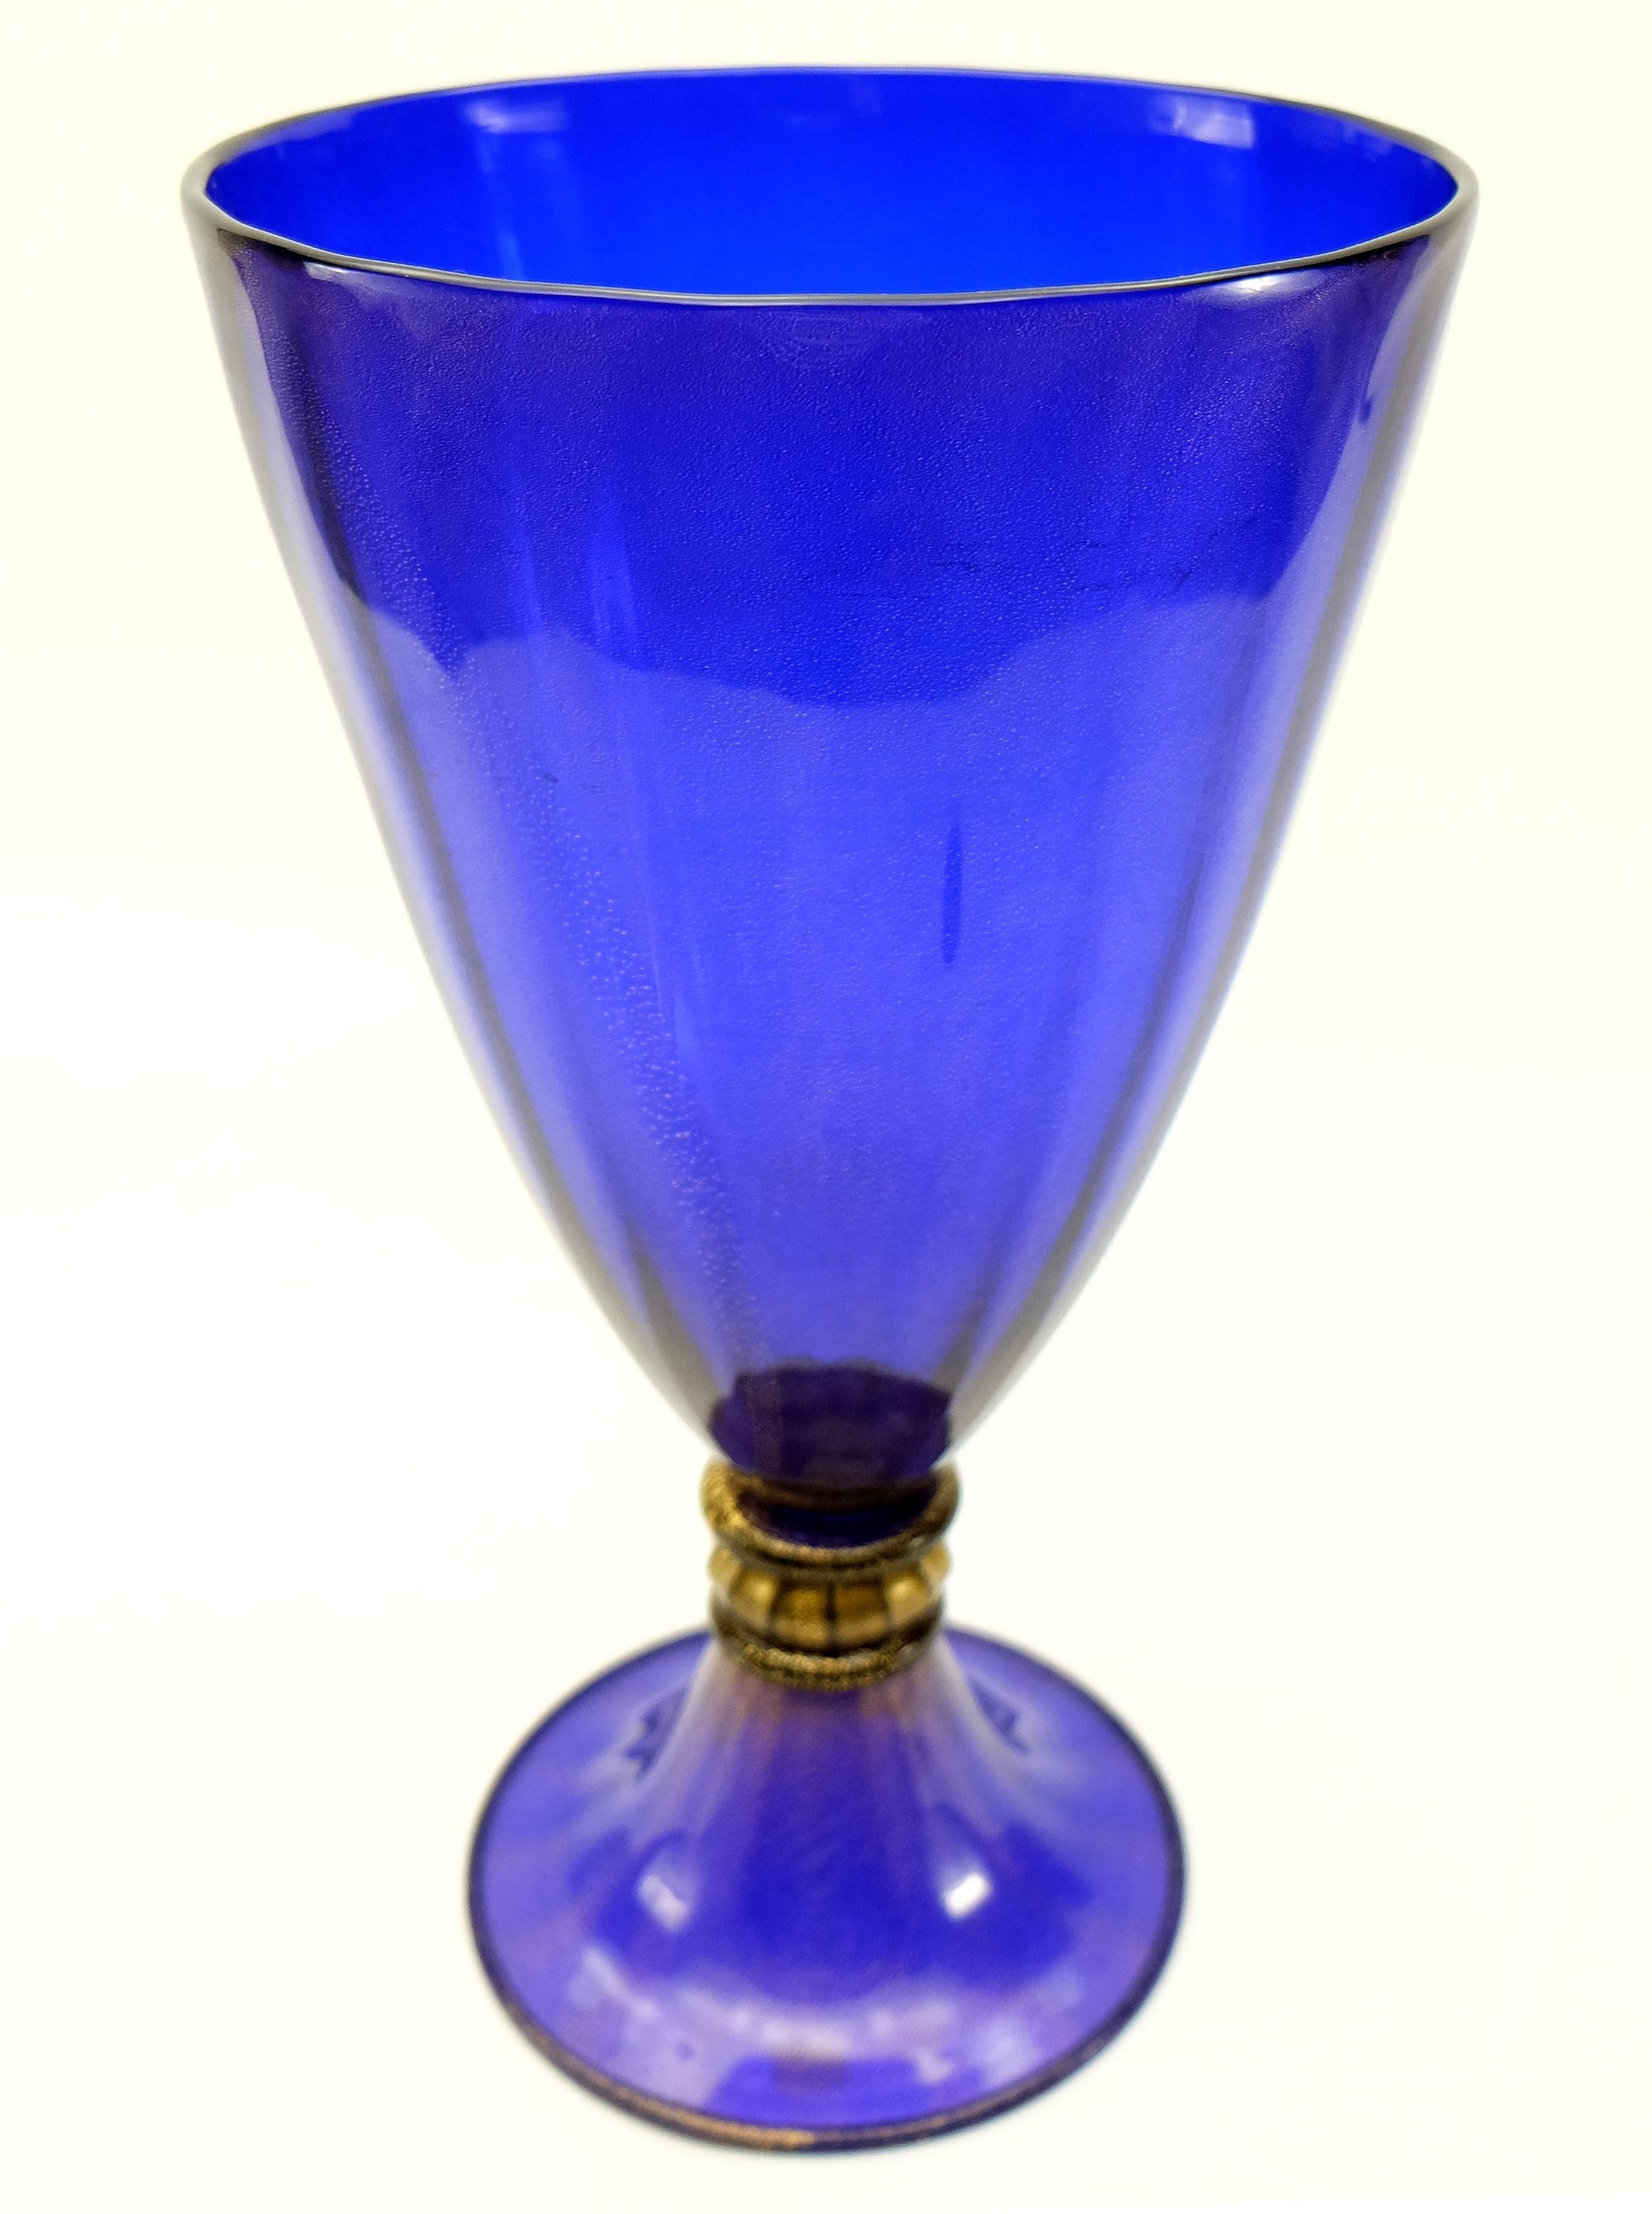 Murano Glass Gold-Infused Vase by Gabbiani Venezia, Italy

Offered for sale is a gold-infused cobalt blue Murano glass vase by Gabbiani. The gold-infusion is found throughout the blue as well as in the transparent accent detail near the base.
This